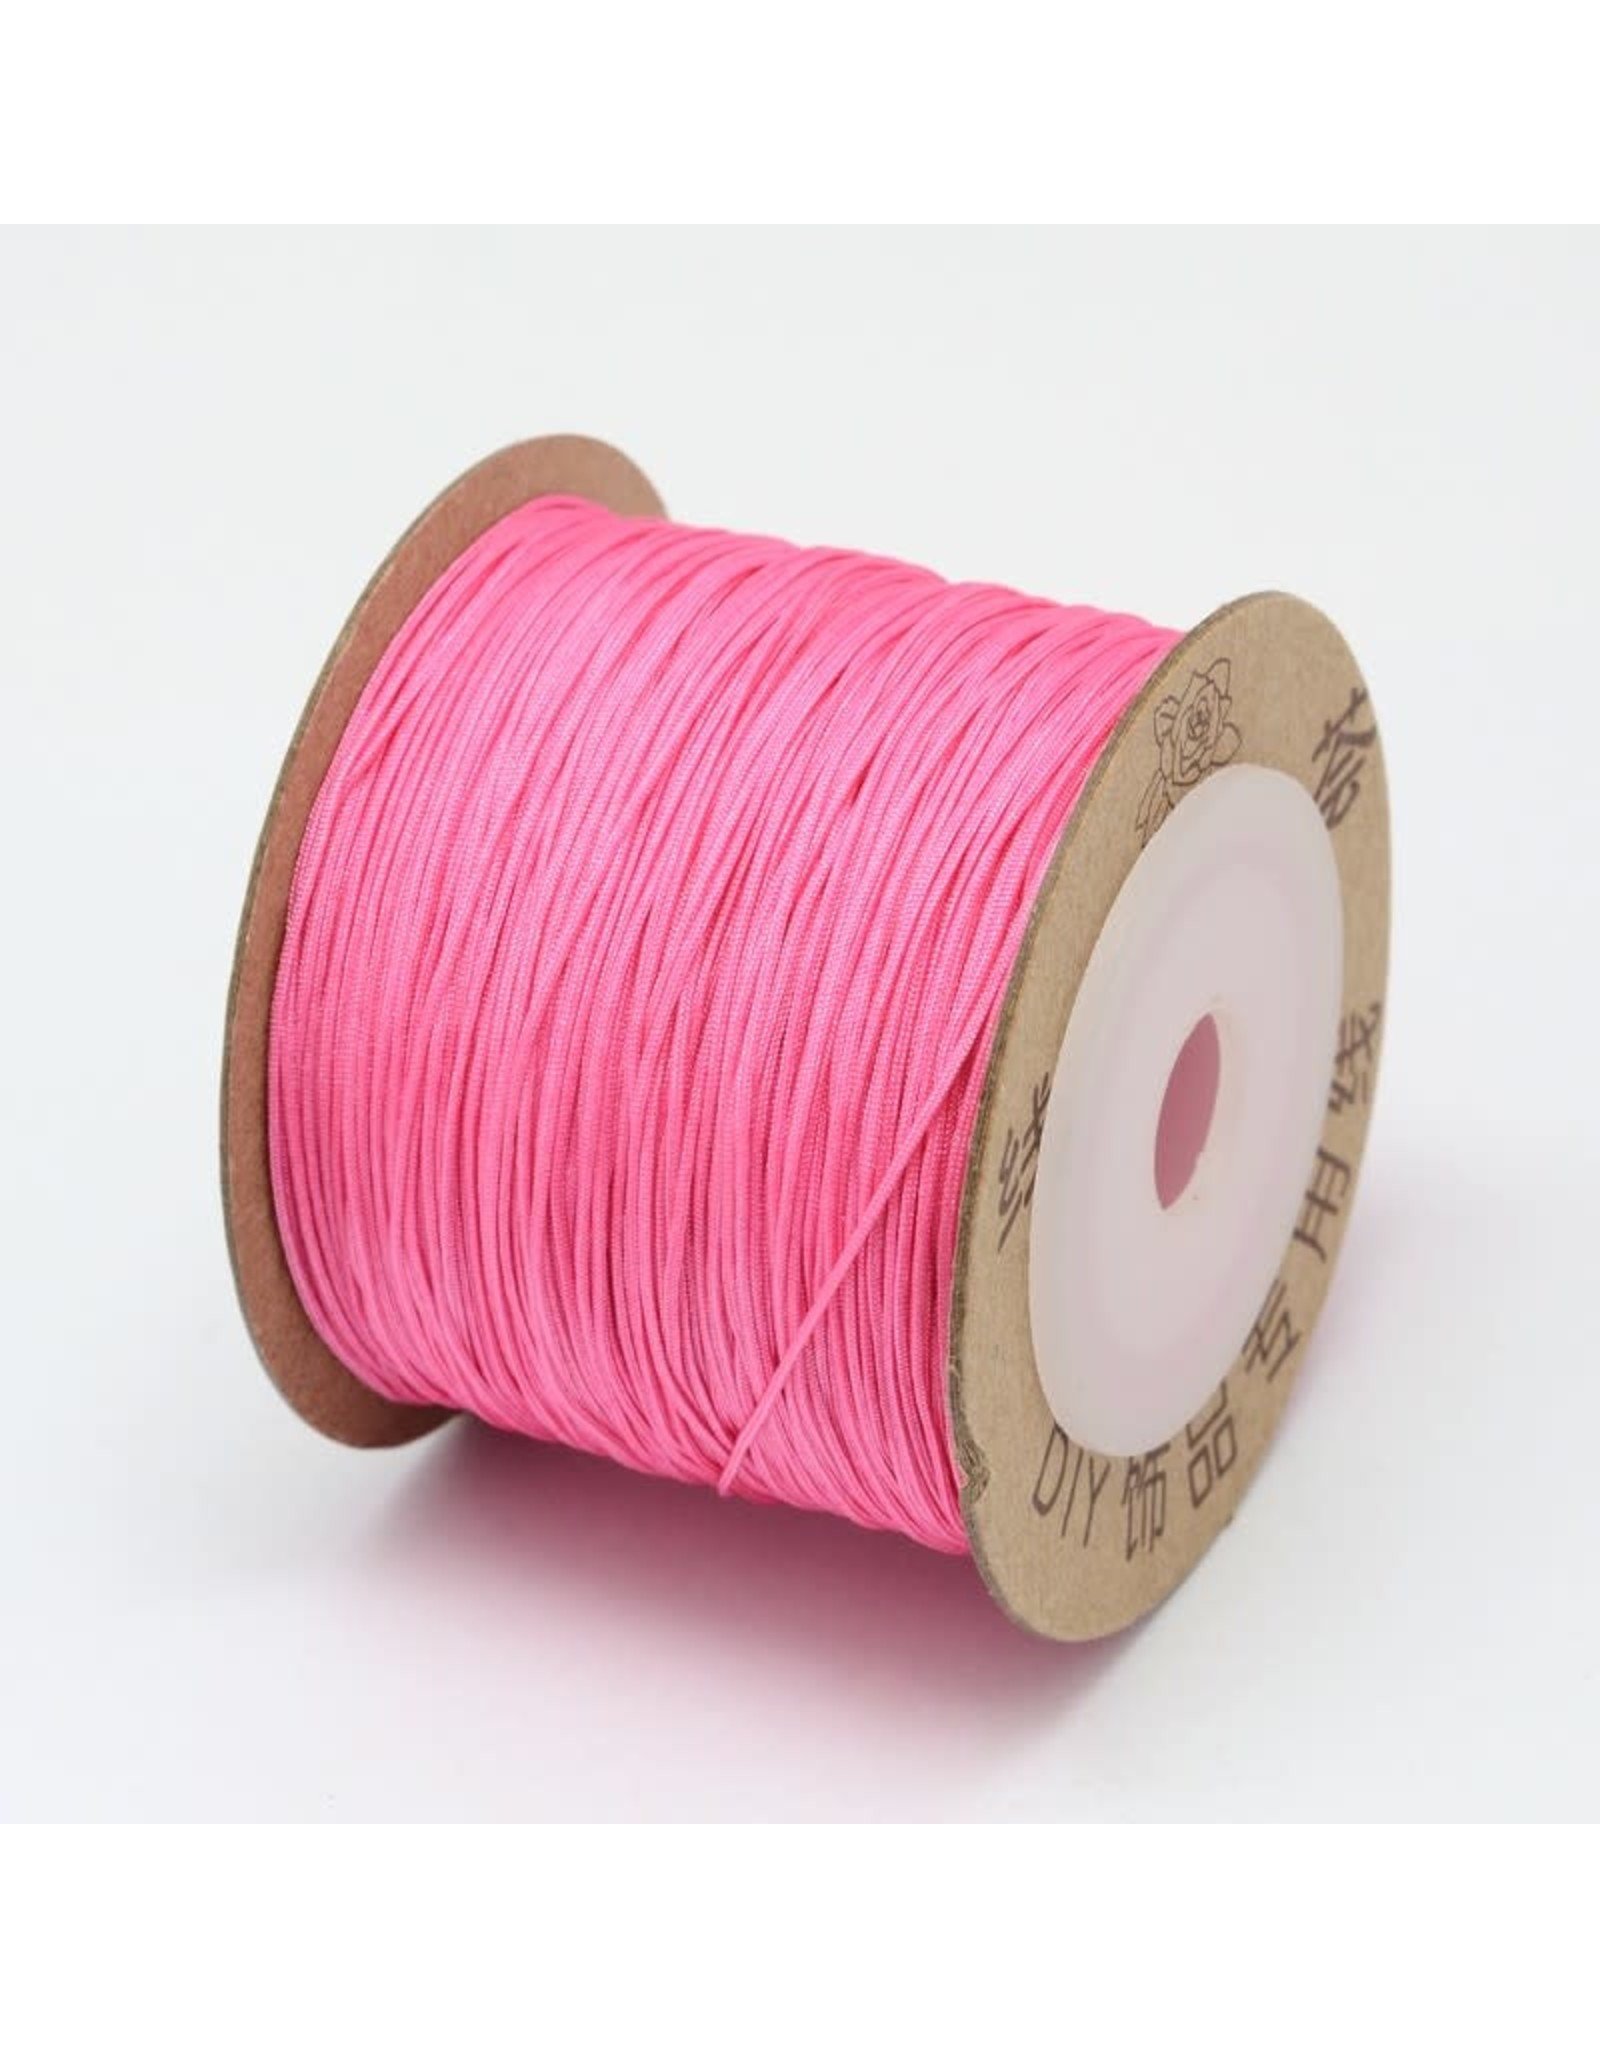 Chinese Knotting Cord .8mm Bright Pink x100m